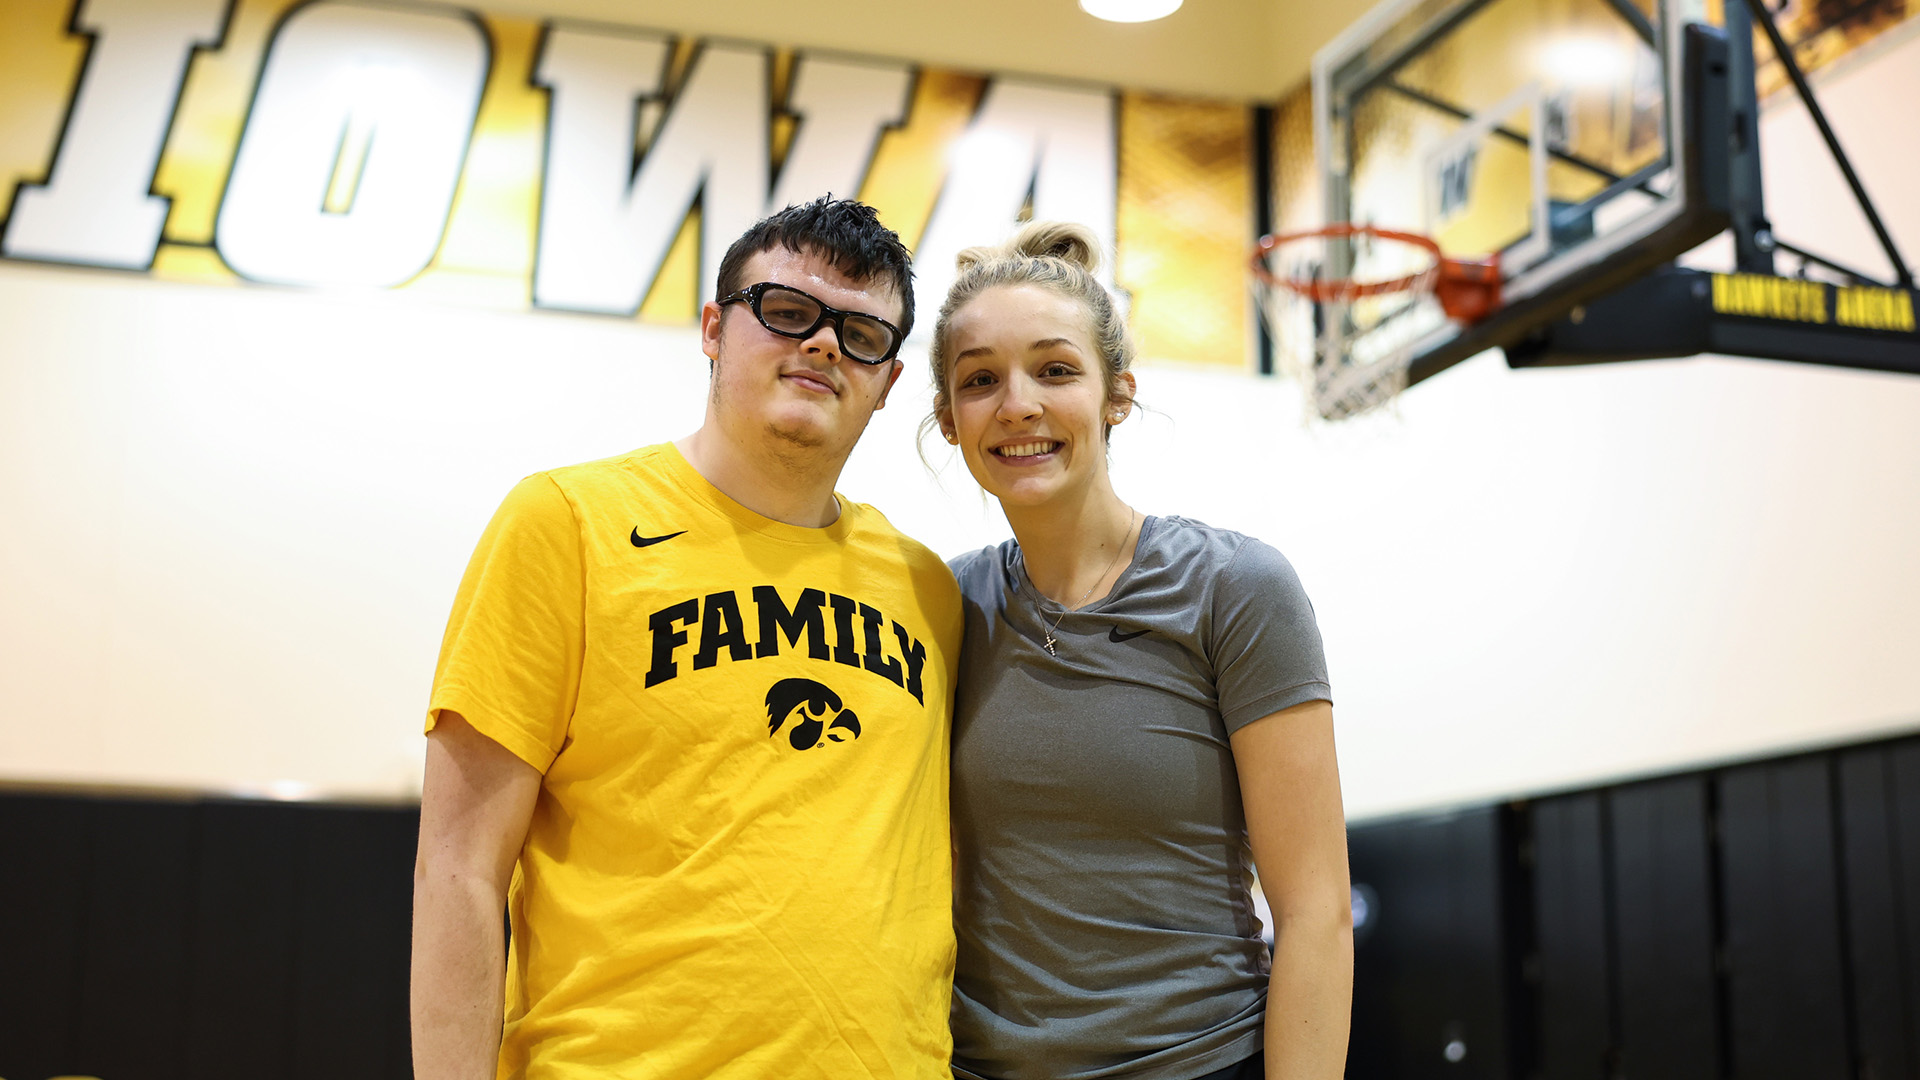 Cooper Reaves and Kylie Feuerbach together at basketball practice